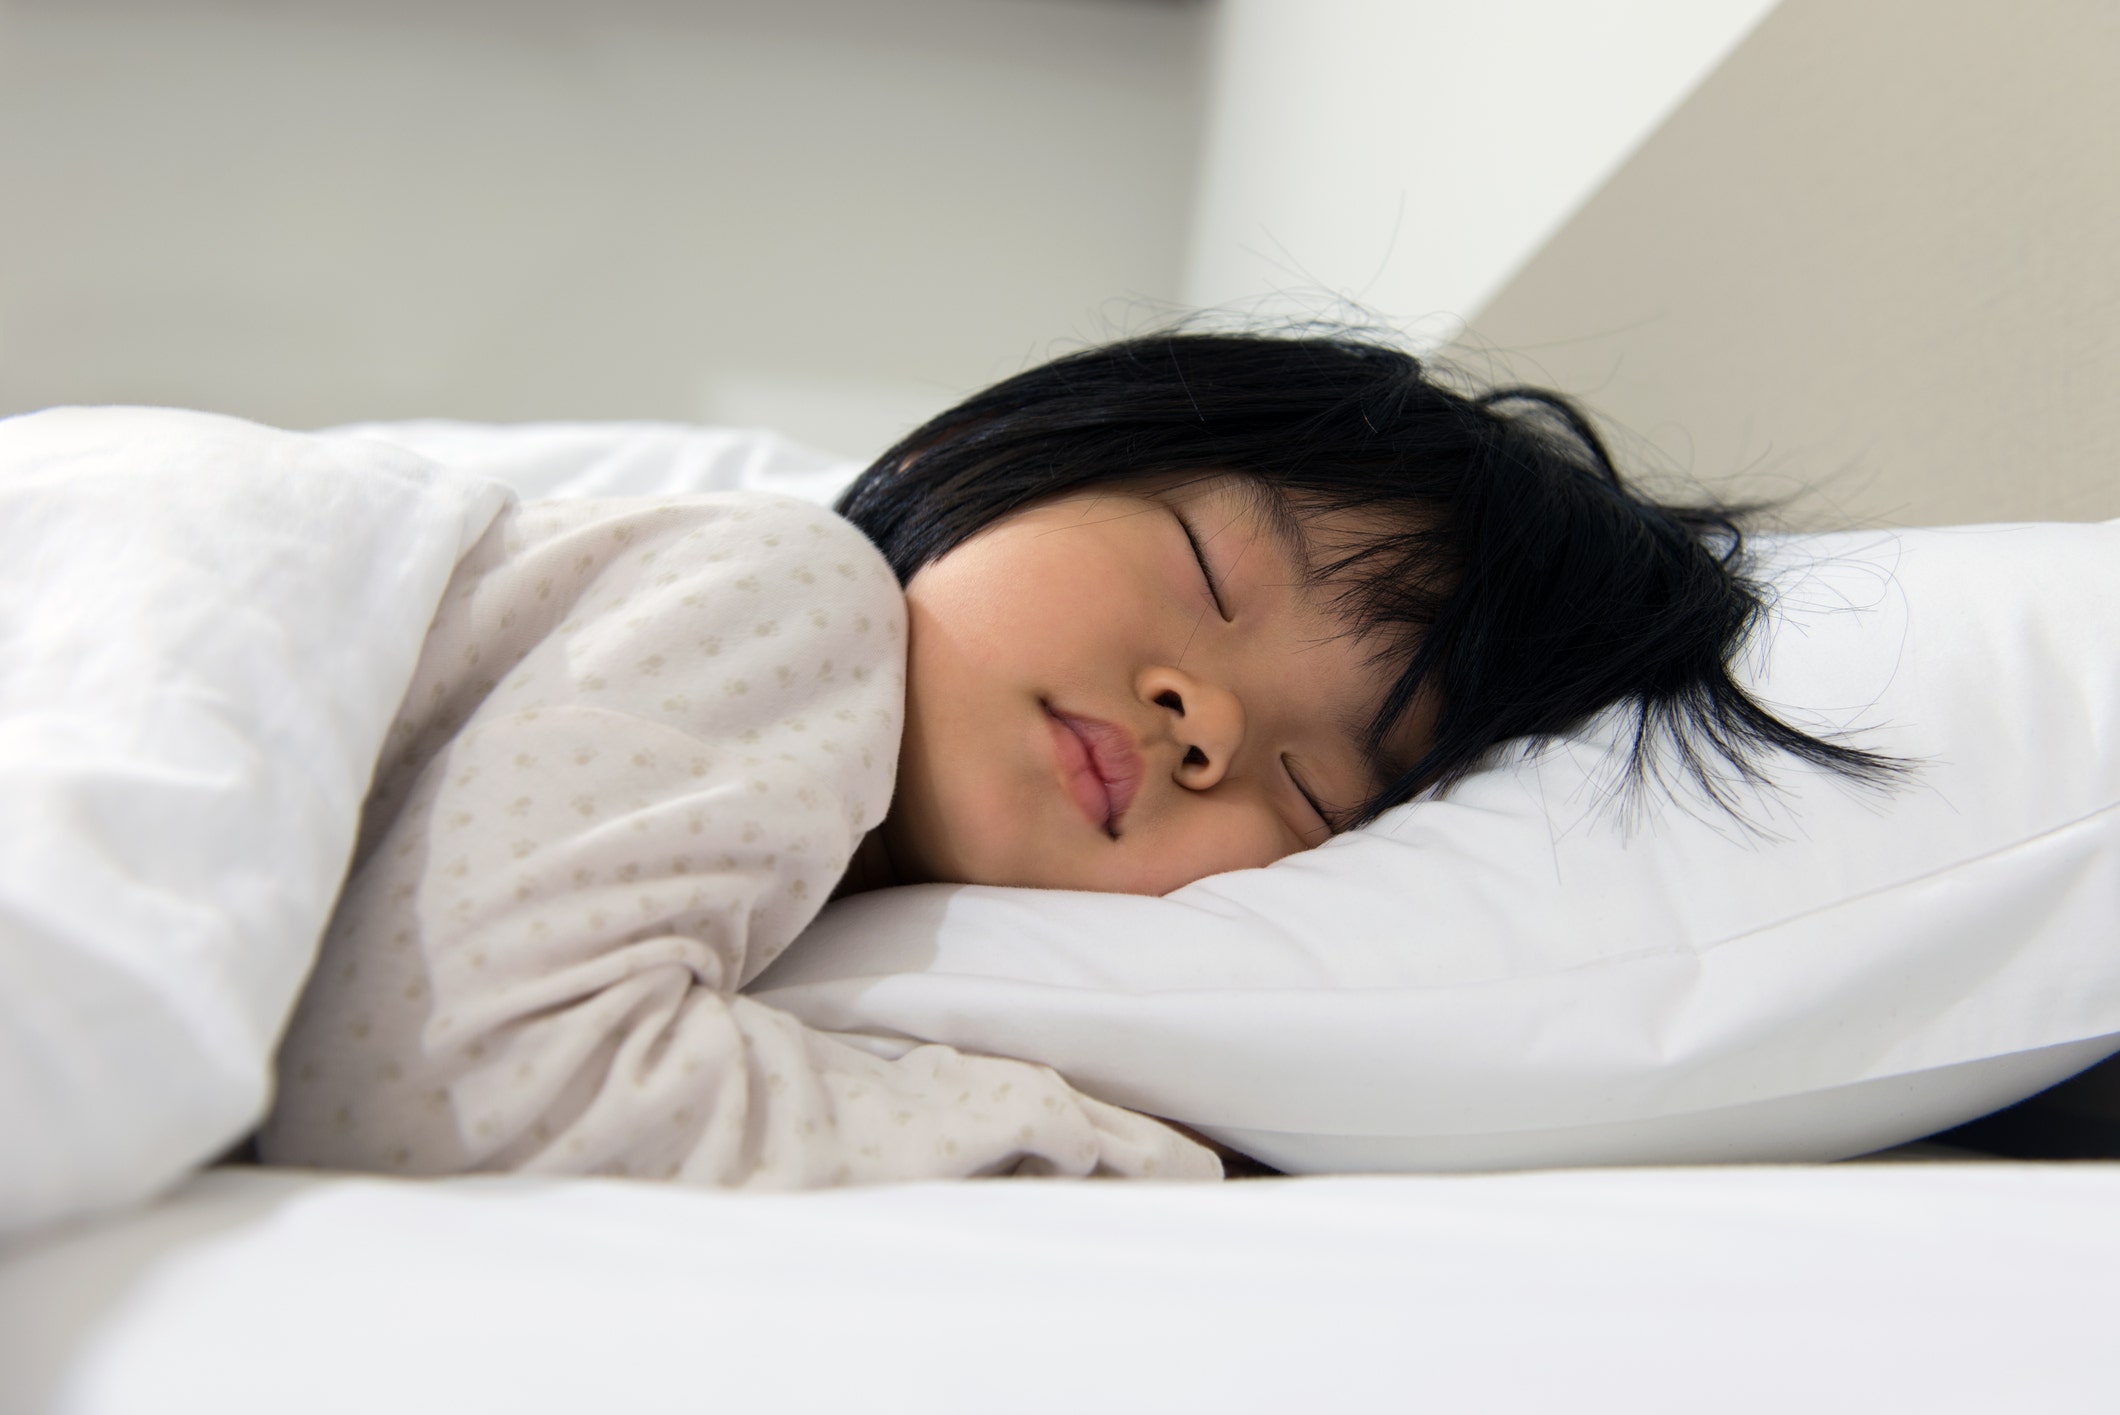 Melatonin should be avoided in children unless directed by a health care professional, says sleep academy